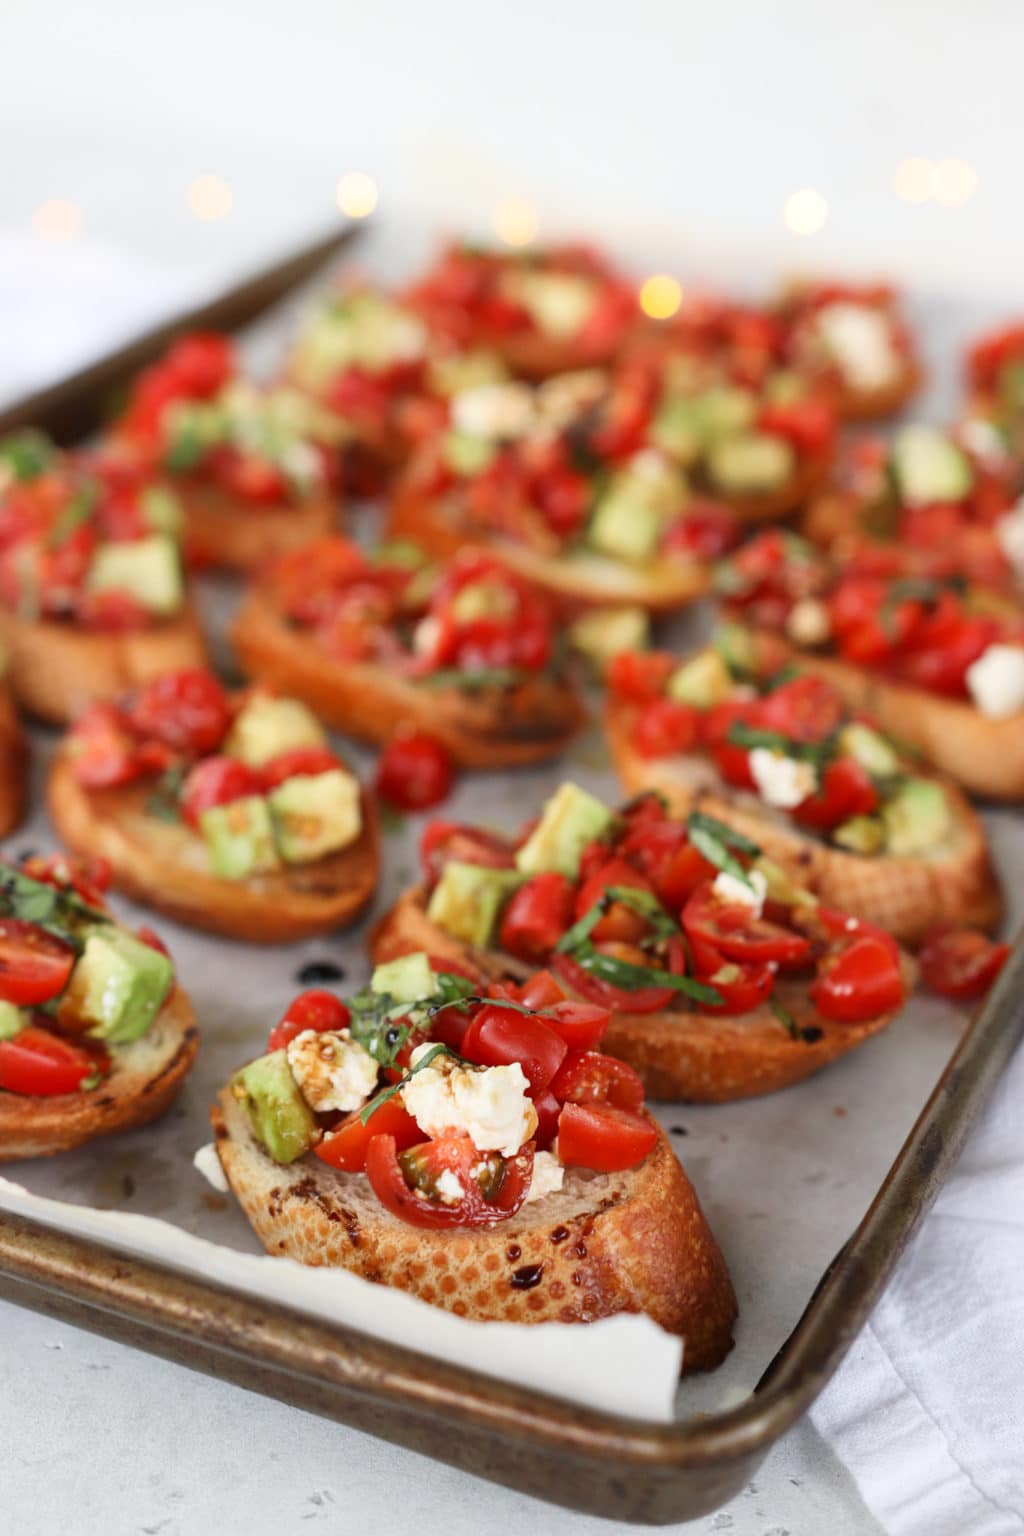 tomato and avocado bruschetta line a parchment paper lined baking sheet. One bruschetta topped crostini is in focus in the front while the other pieces fade into the background